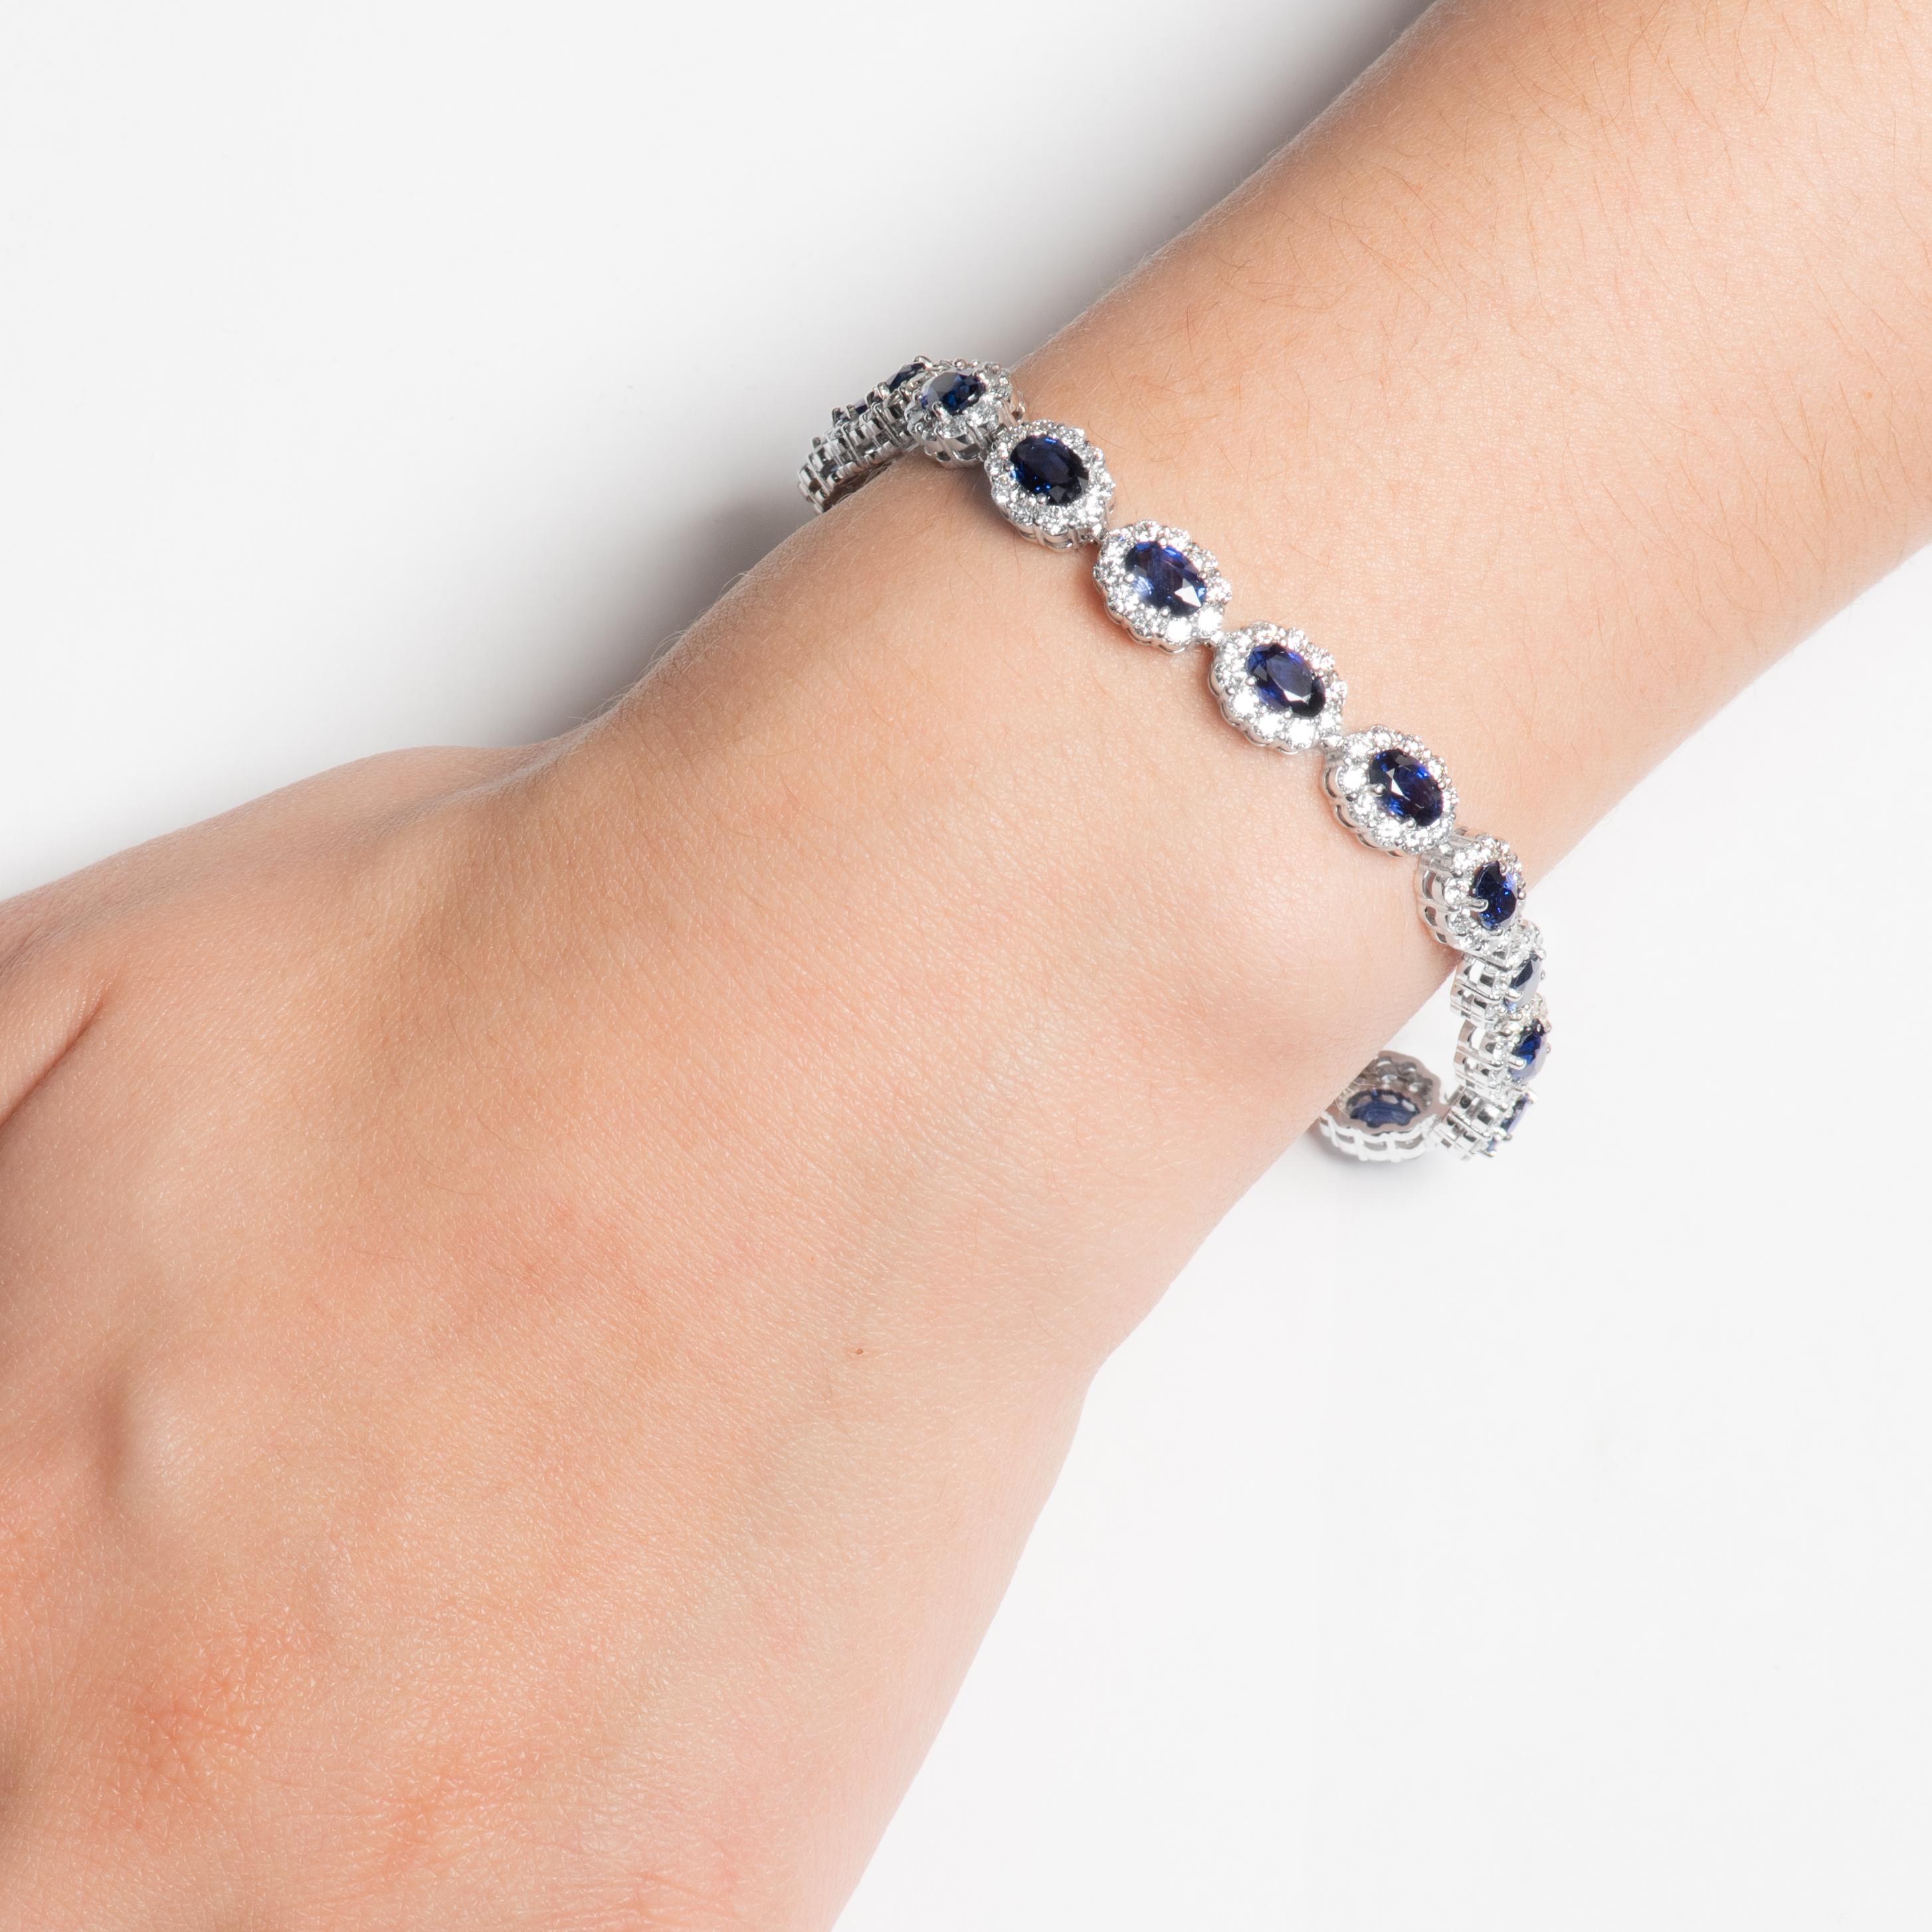 This stunning bracelet has 18 rich royal blue, well matched oval sapphires with a total weight of 9.21ct. They are surrounded by halos of round diamonds, with a total weight of 5.56ct. The bracelet itself is a 7 inch 14kt white gold bracelet.